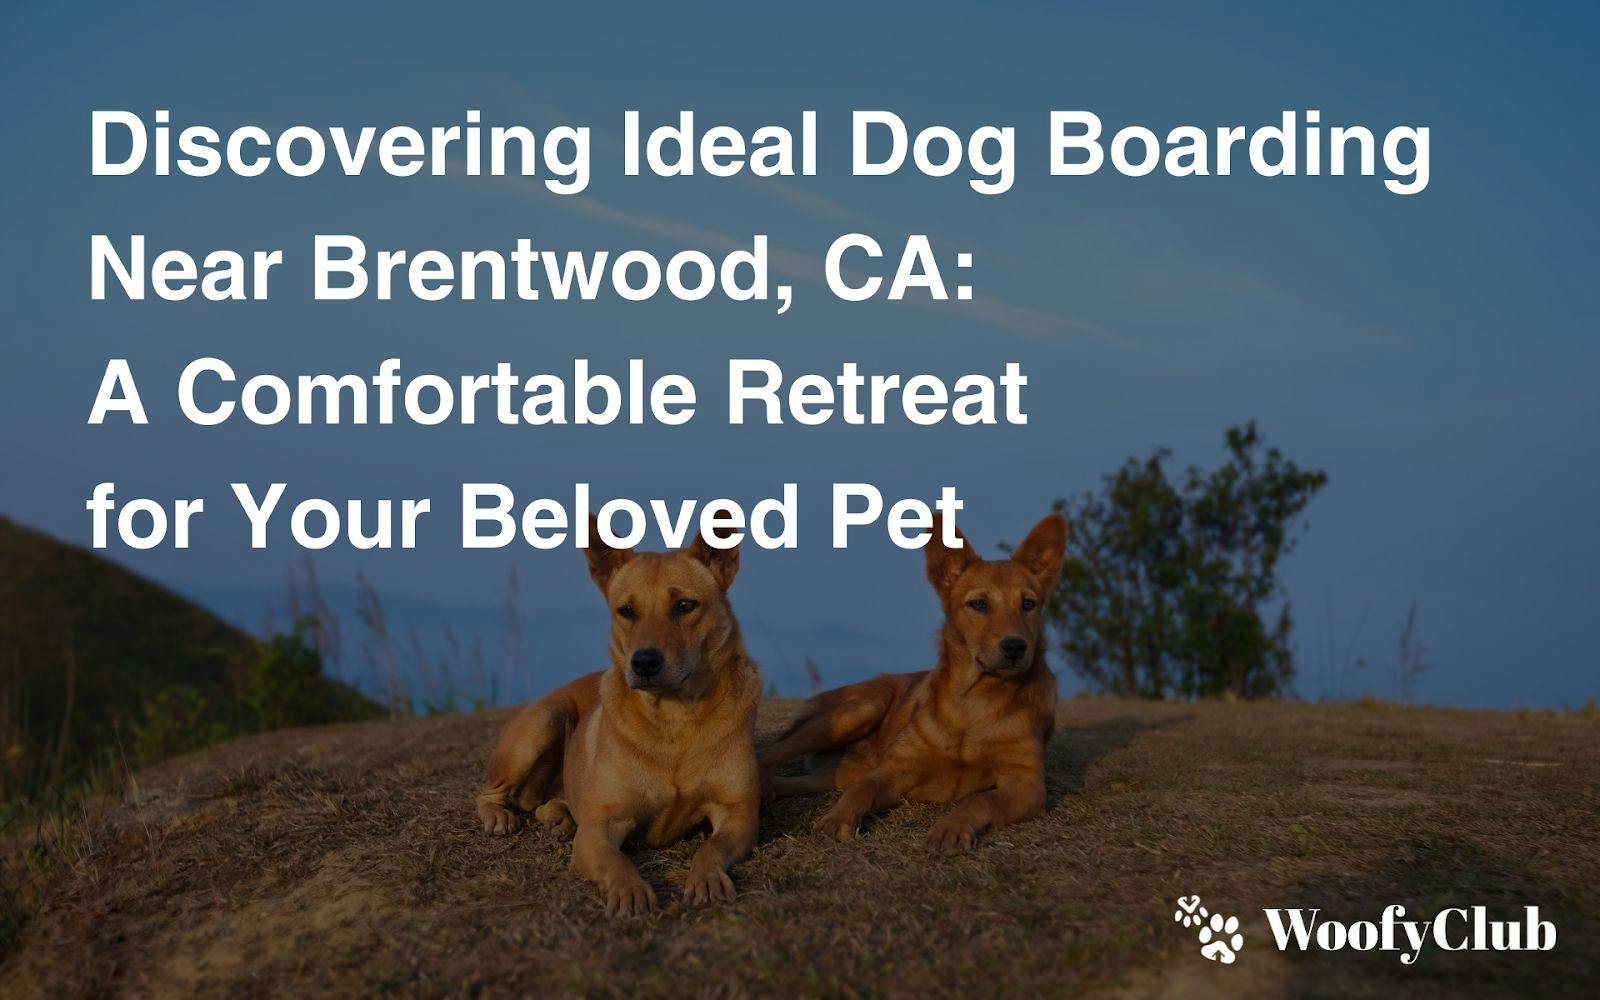 Discovering Ideal Dog Boarding Near Brentwood, CA: A Comfortable Retreat For Your Beloved Pet